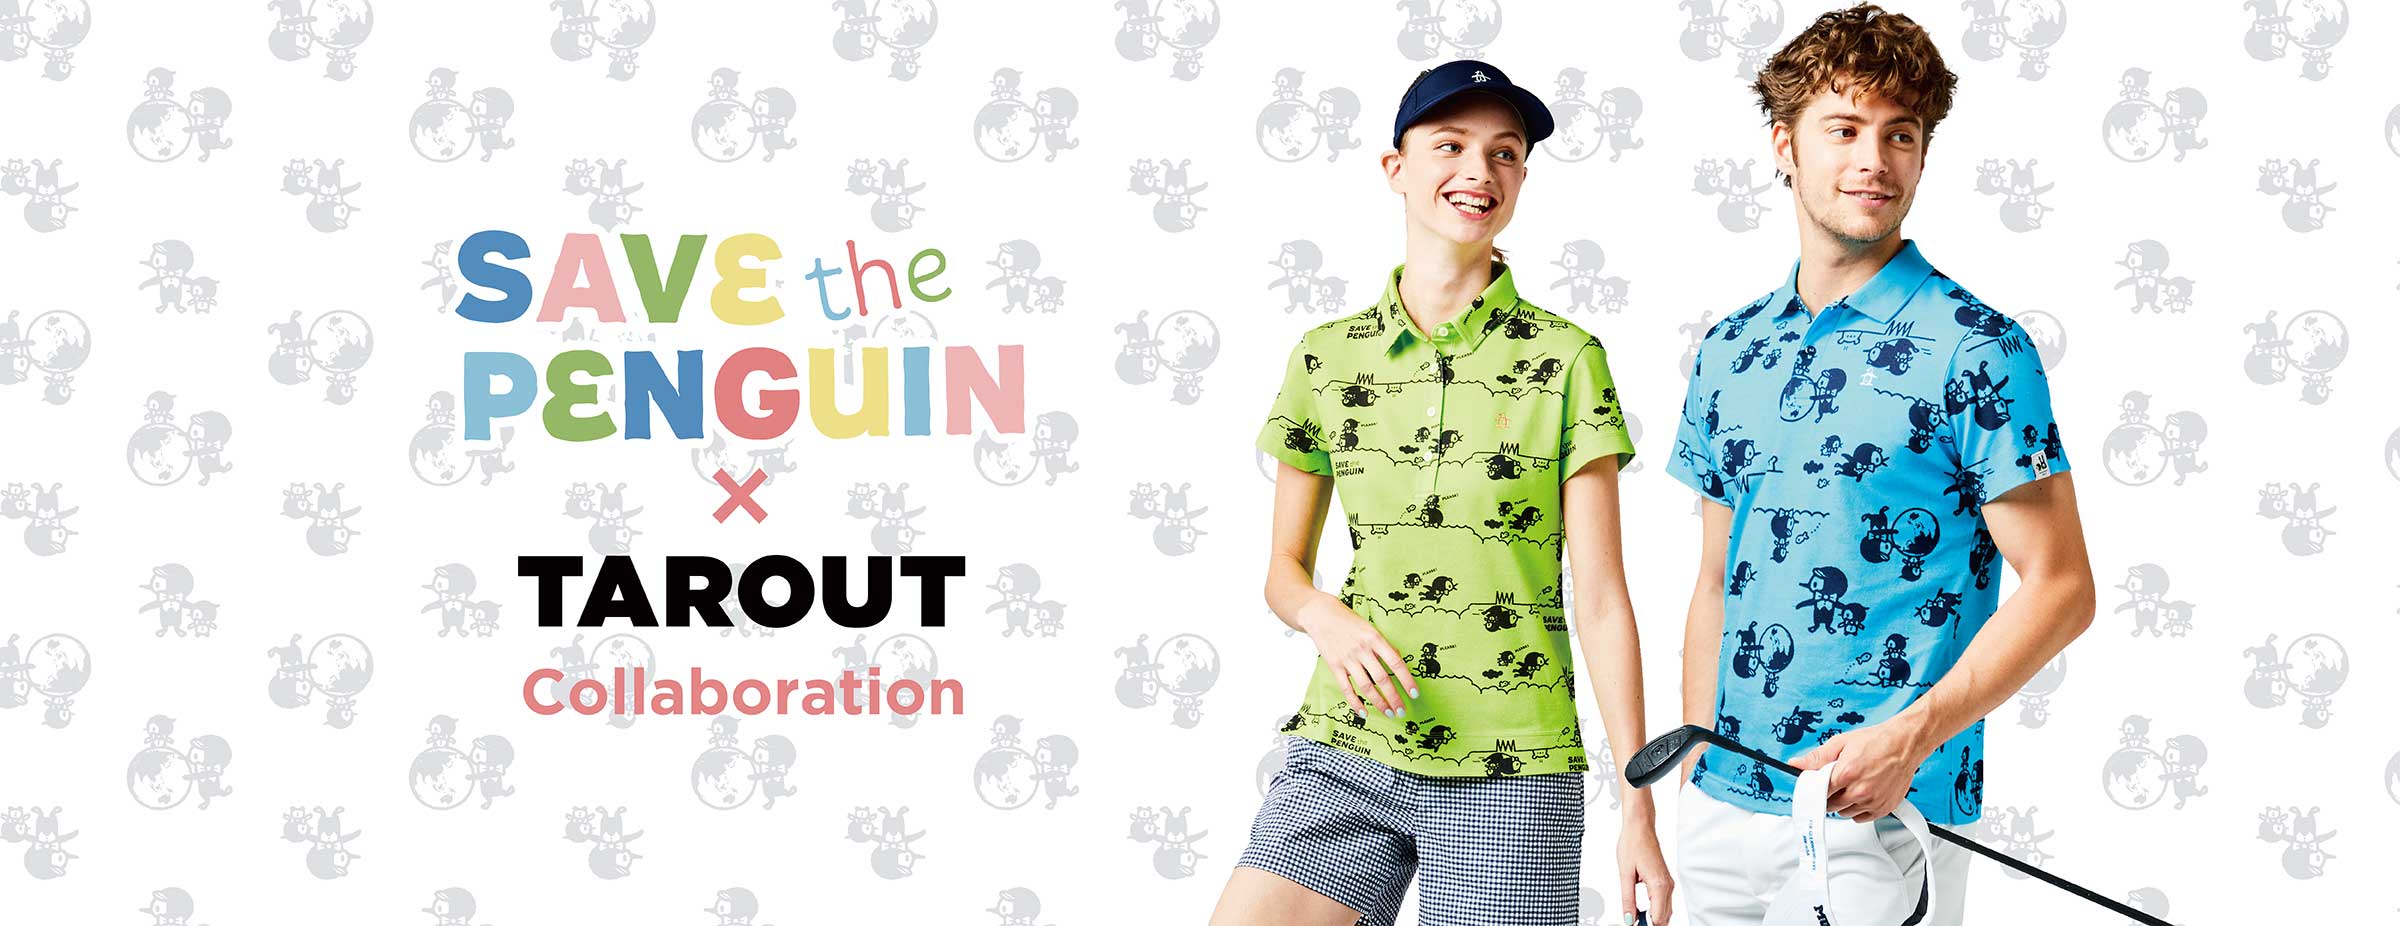 SAVE the PENGUIN × TAROUT Collaboration